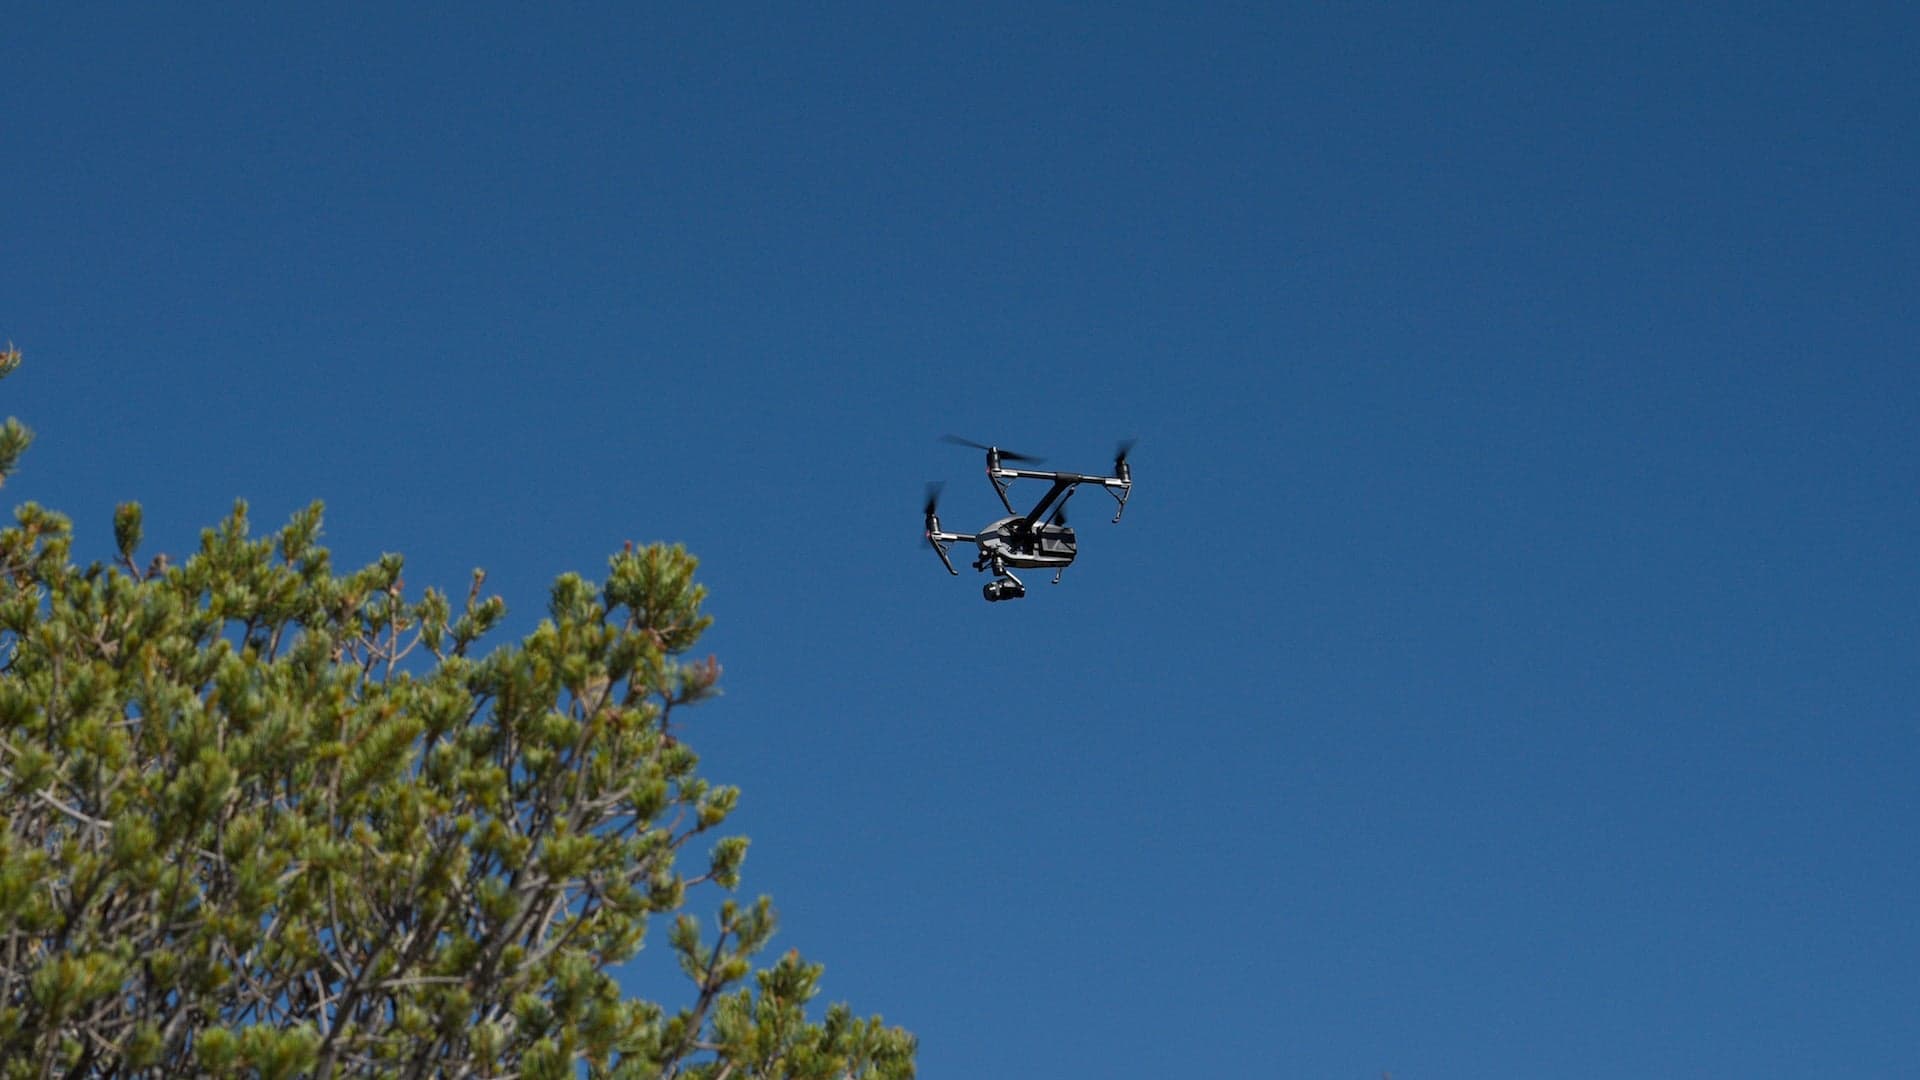 Law Enforcement Drone Use in Pennsylvania Raises Privacy Rights Concerns